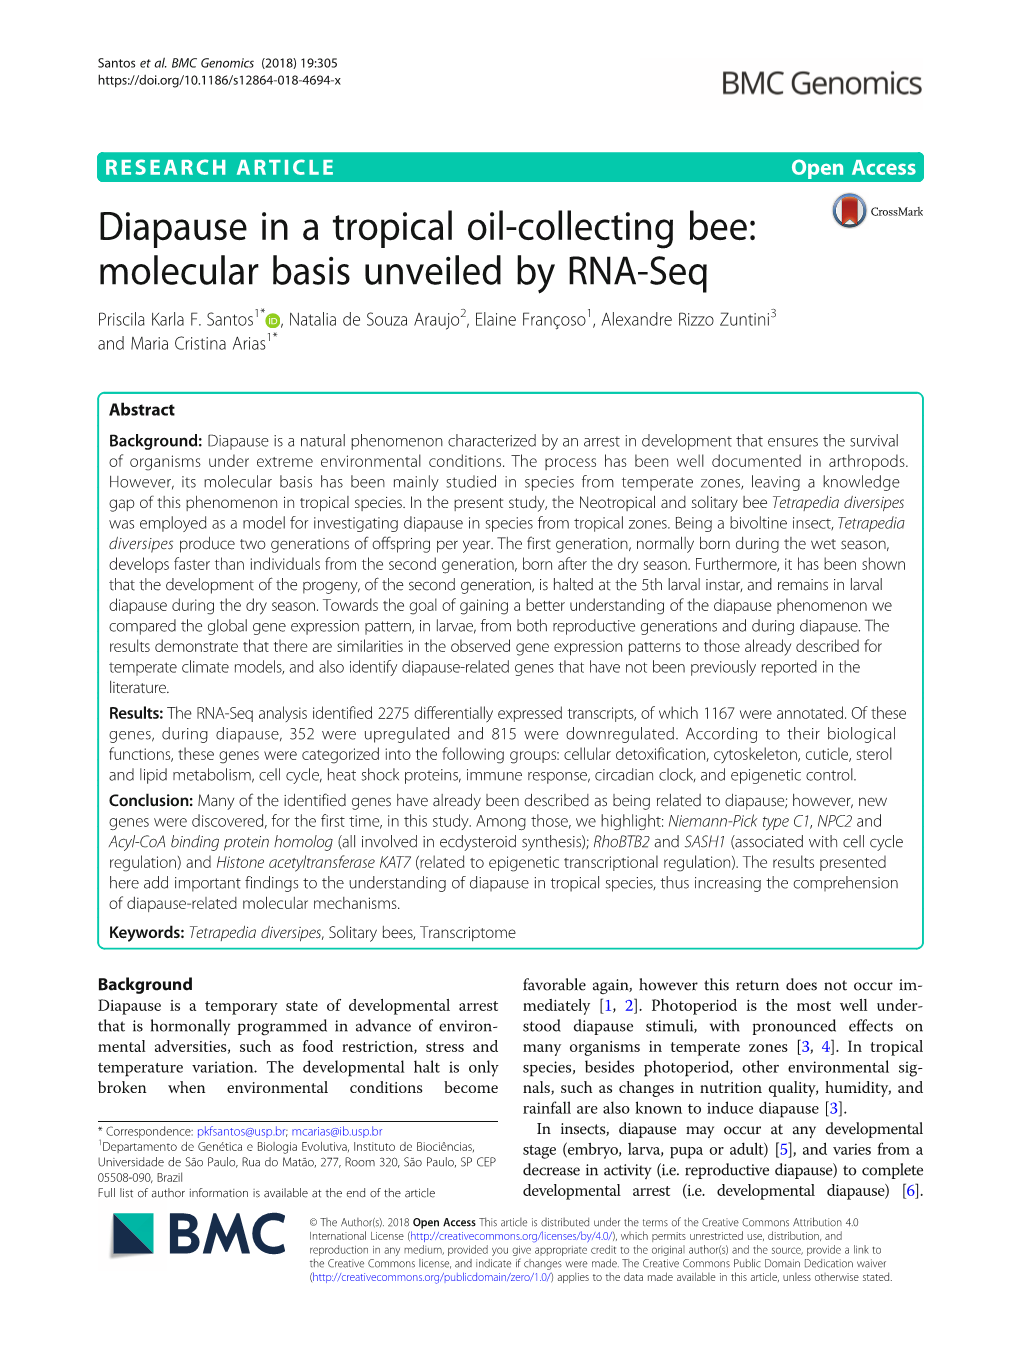 Diapause in a Tropical Oil-Collecting Bee: Molecular Basis Unveiled by RNA-Seq Priscila Karla F